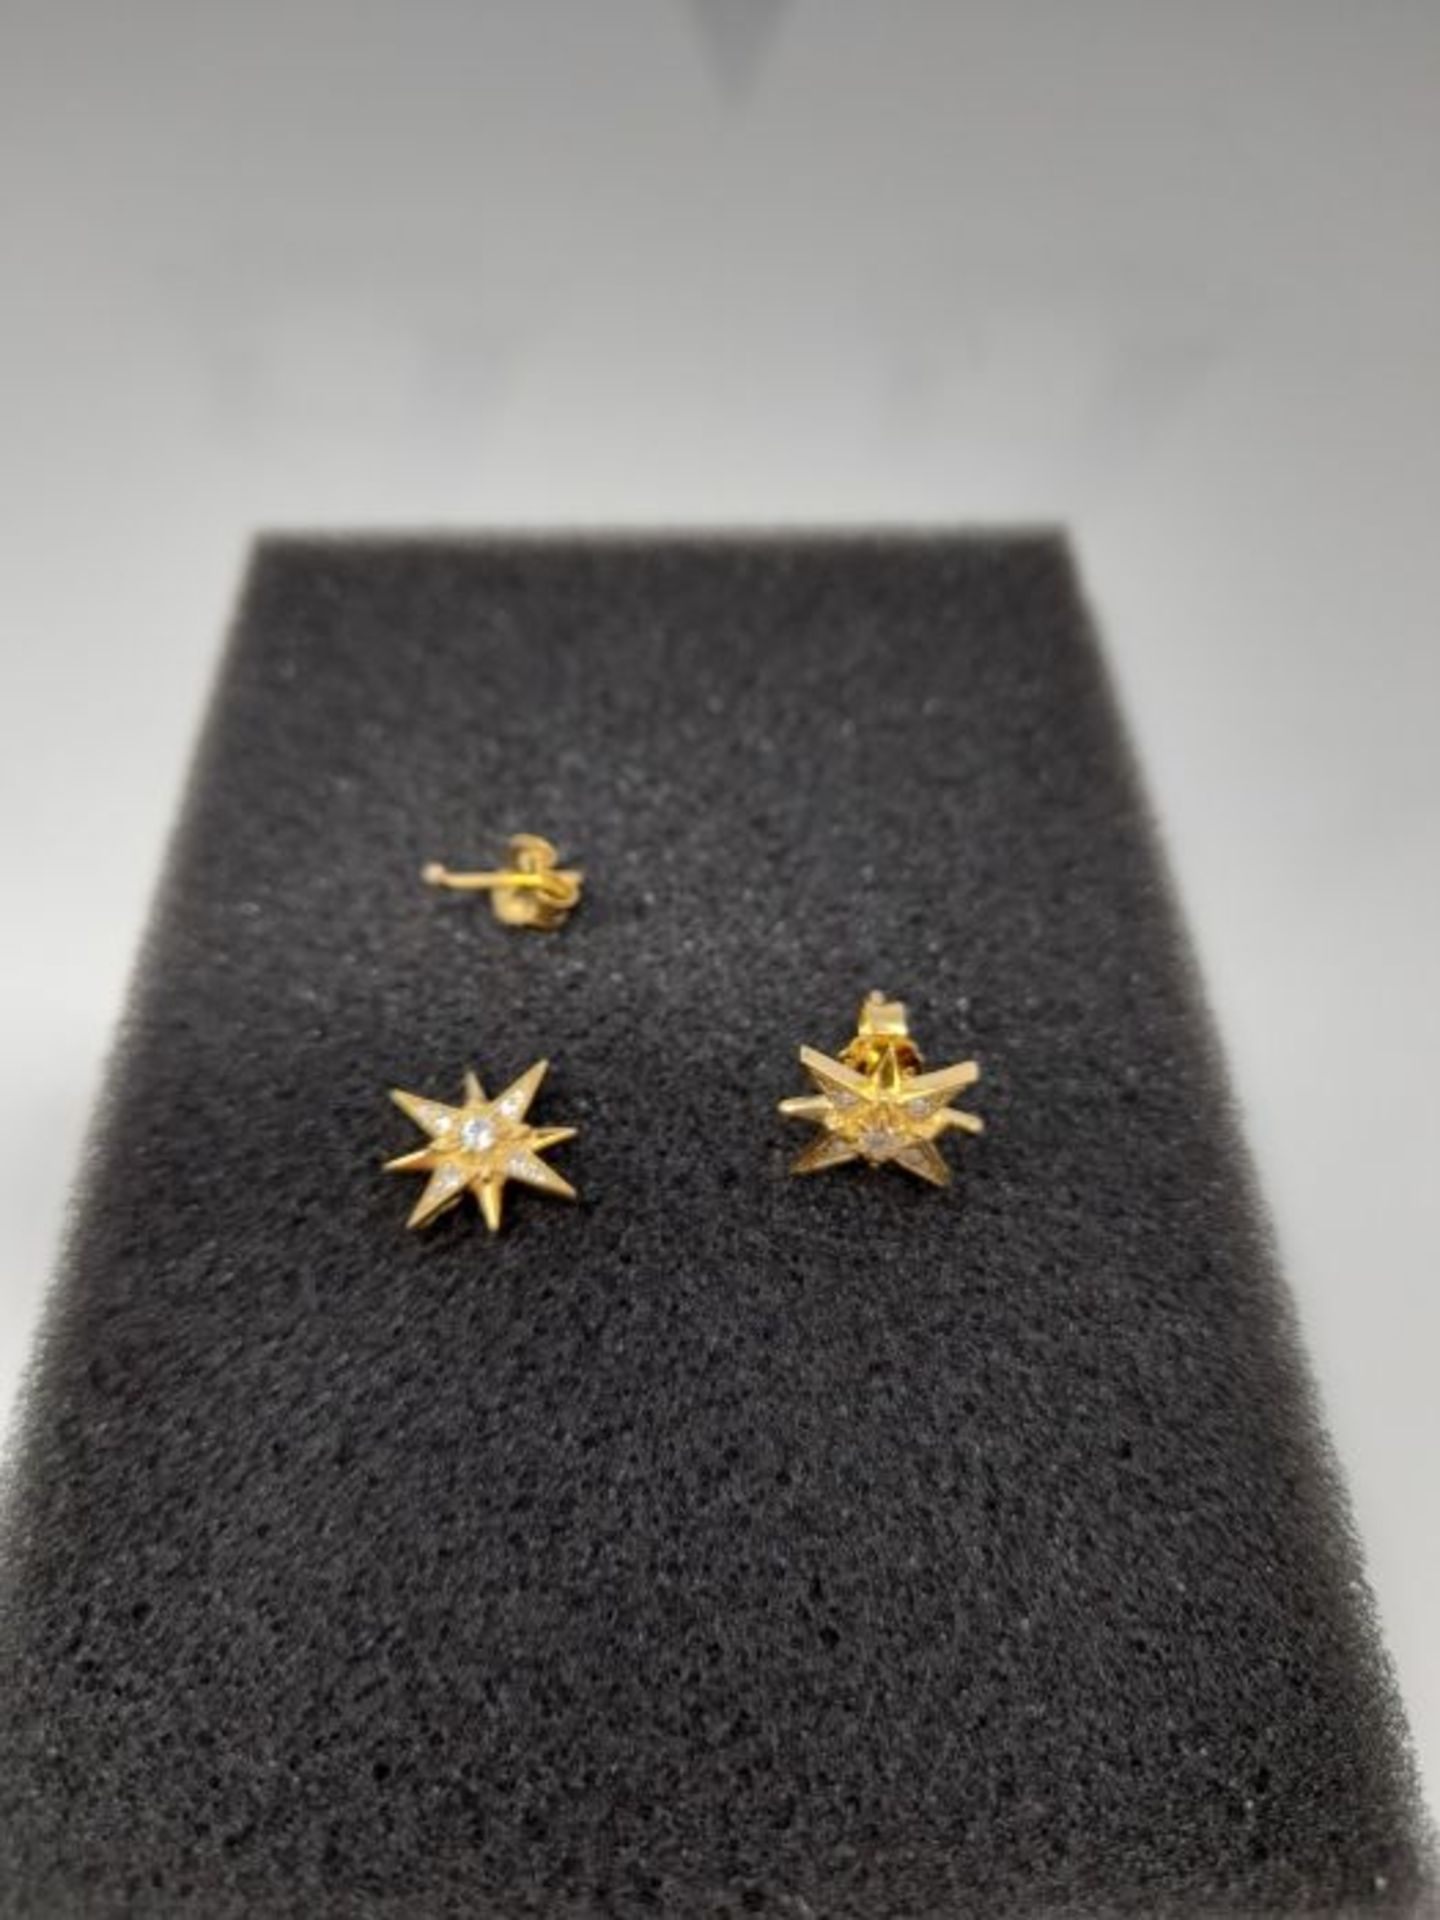 RRP £55.00 [CRACKED] Thomas Sabo Women Stud Earrings Star 925 Sterling Silver H2081-414-14 - Image 2 of 3